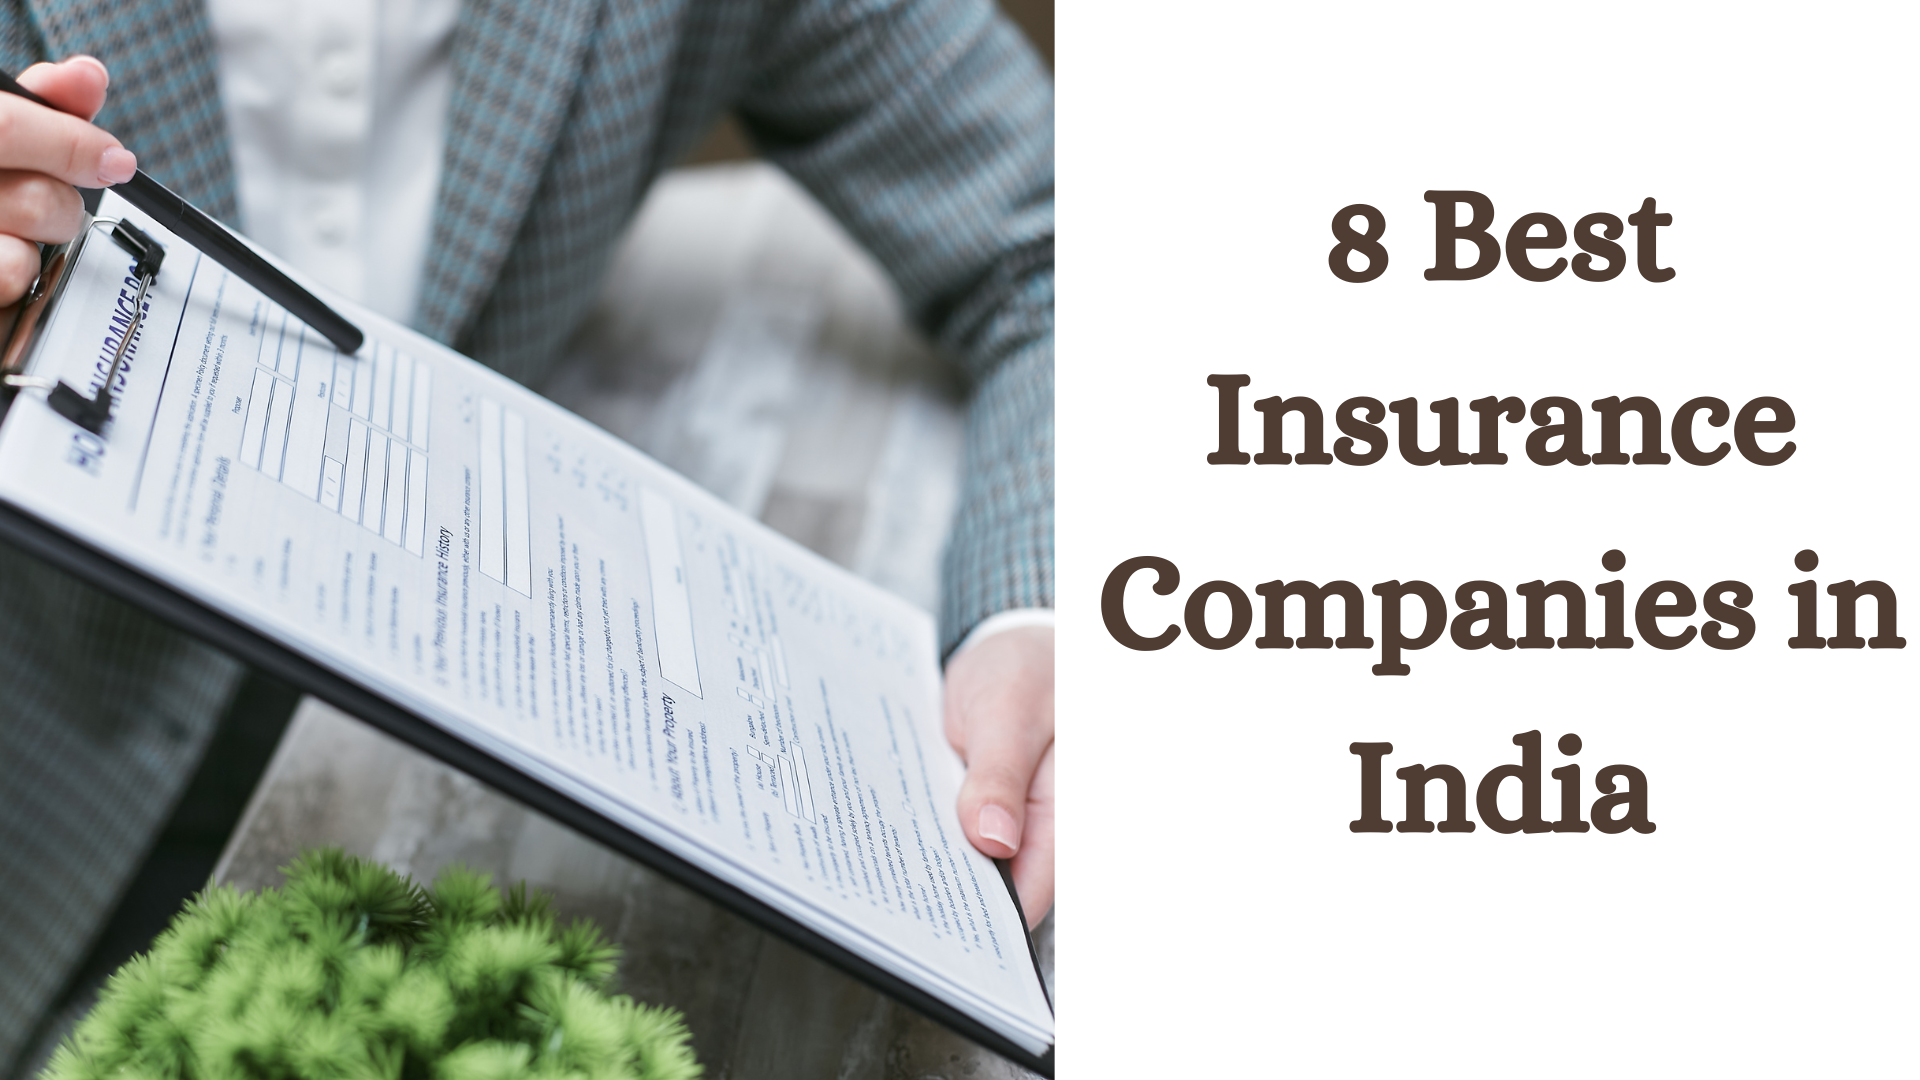 8 Best Insurance Companies in India